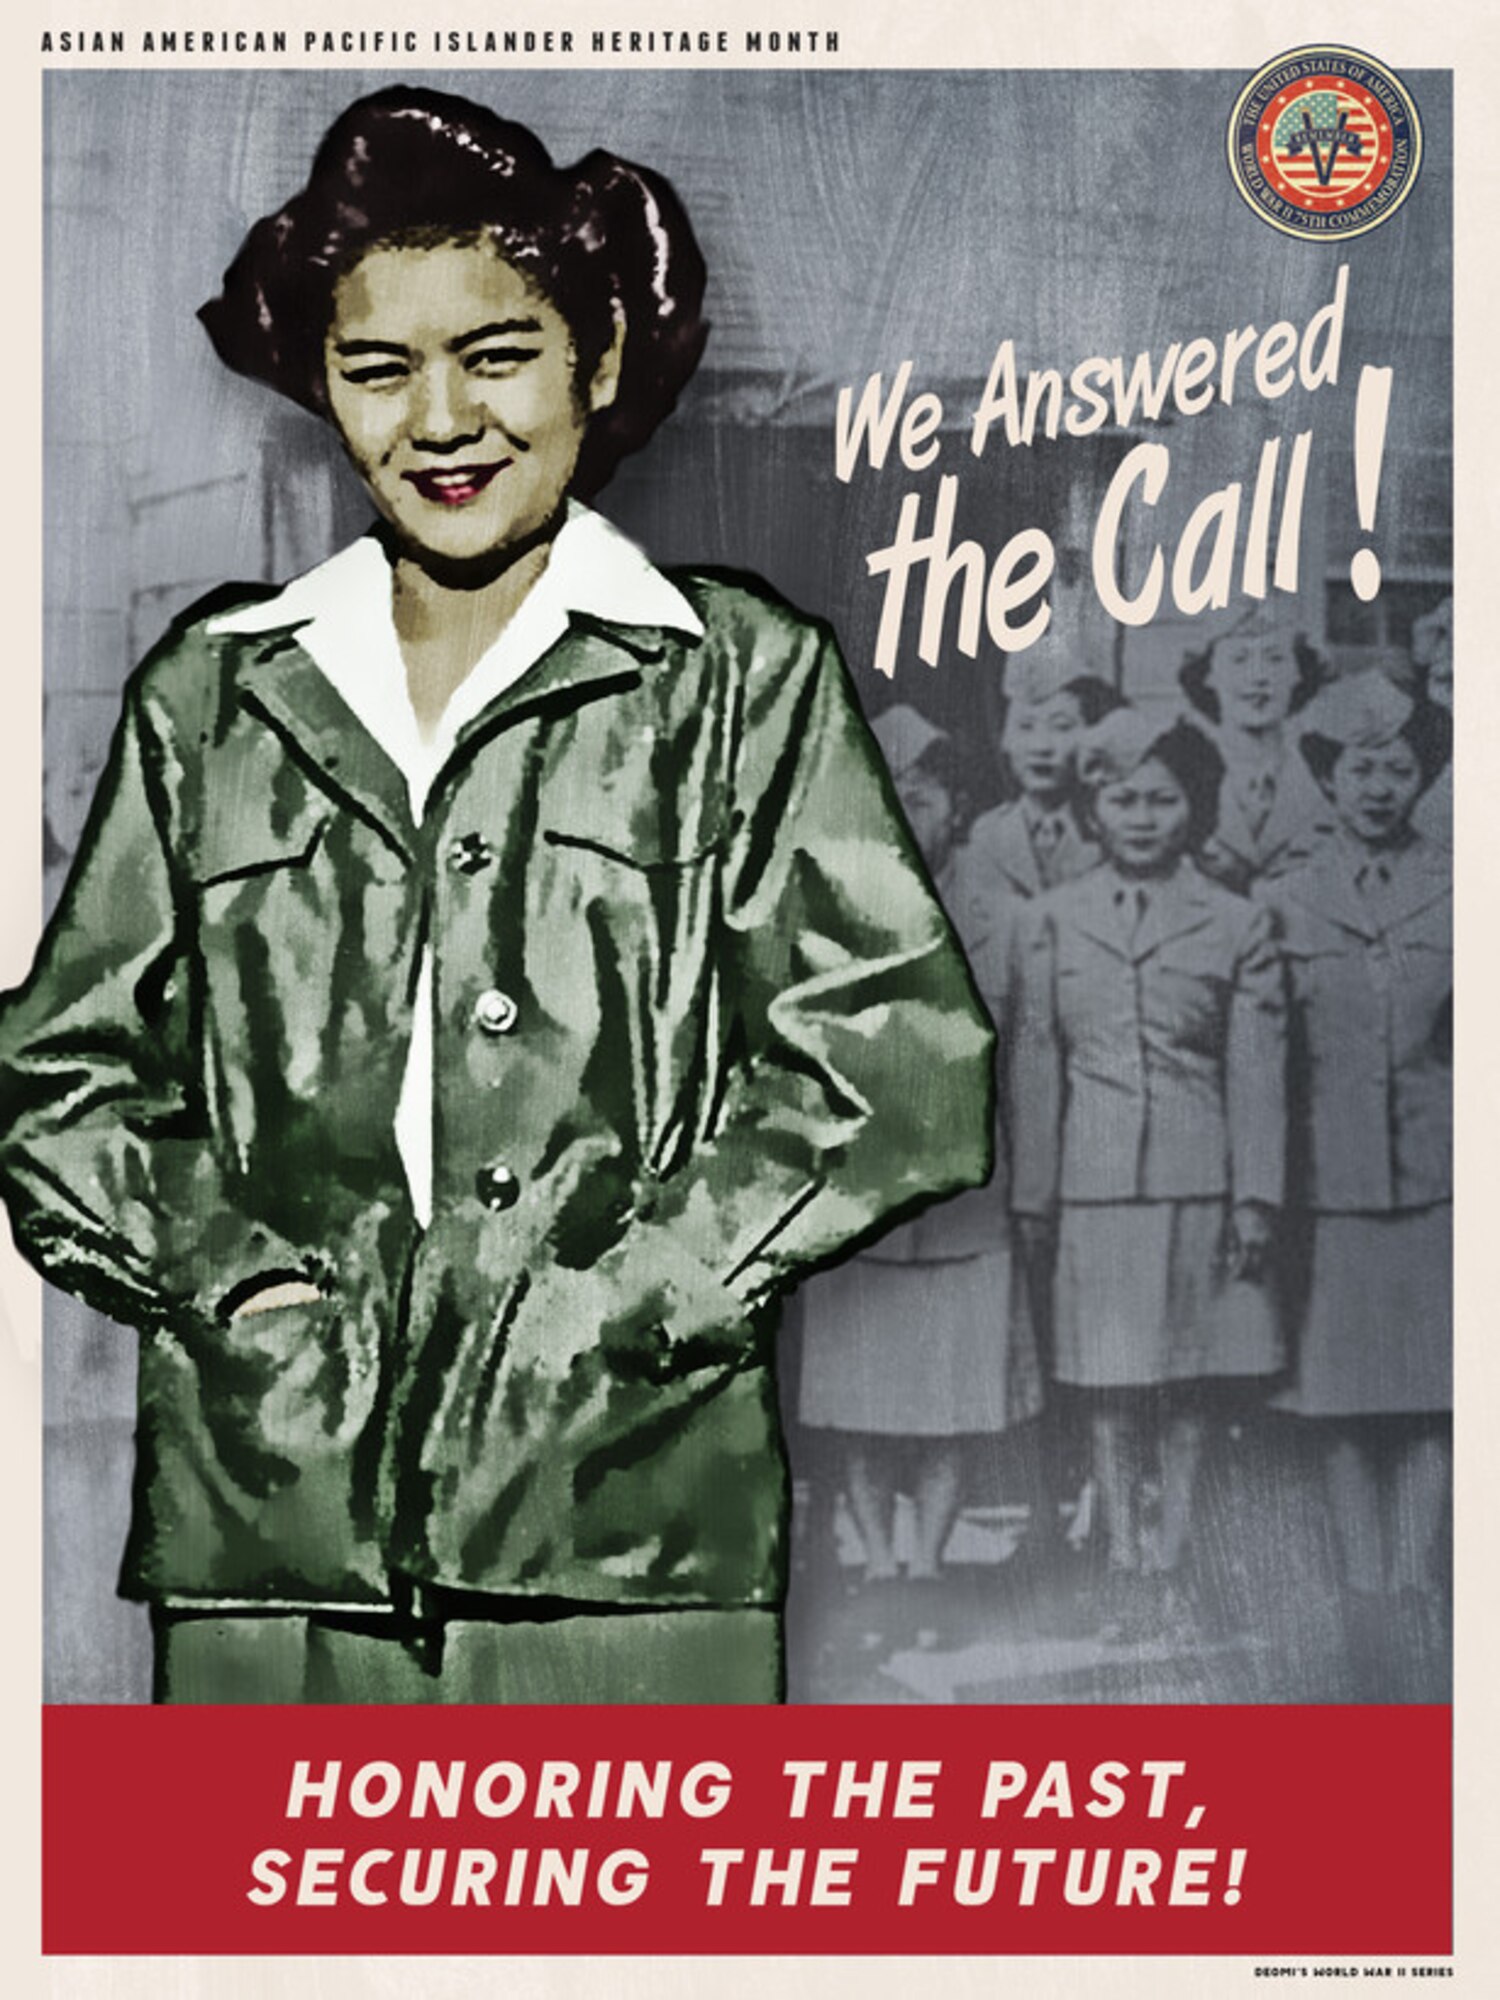 The Department of Defense Asian American Pacific Islander Heritage Month posters are part of a series commemorating the 75th Anniversary of World War II. Each commemoration poster set highlights the significant contributions of special observance groups towards achieving total victory in this watershed event. Each poster is reminiscent of the colors and styles found in the 1940’s Recruitment and Victory posters from the World War II era. (Courtesy graphic)